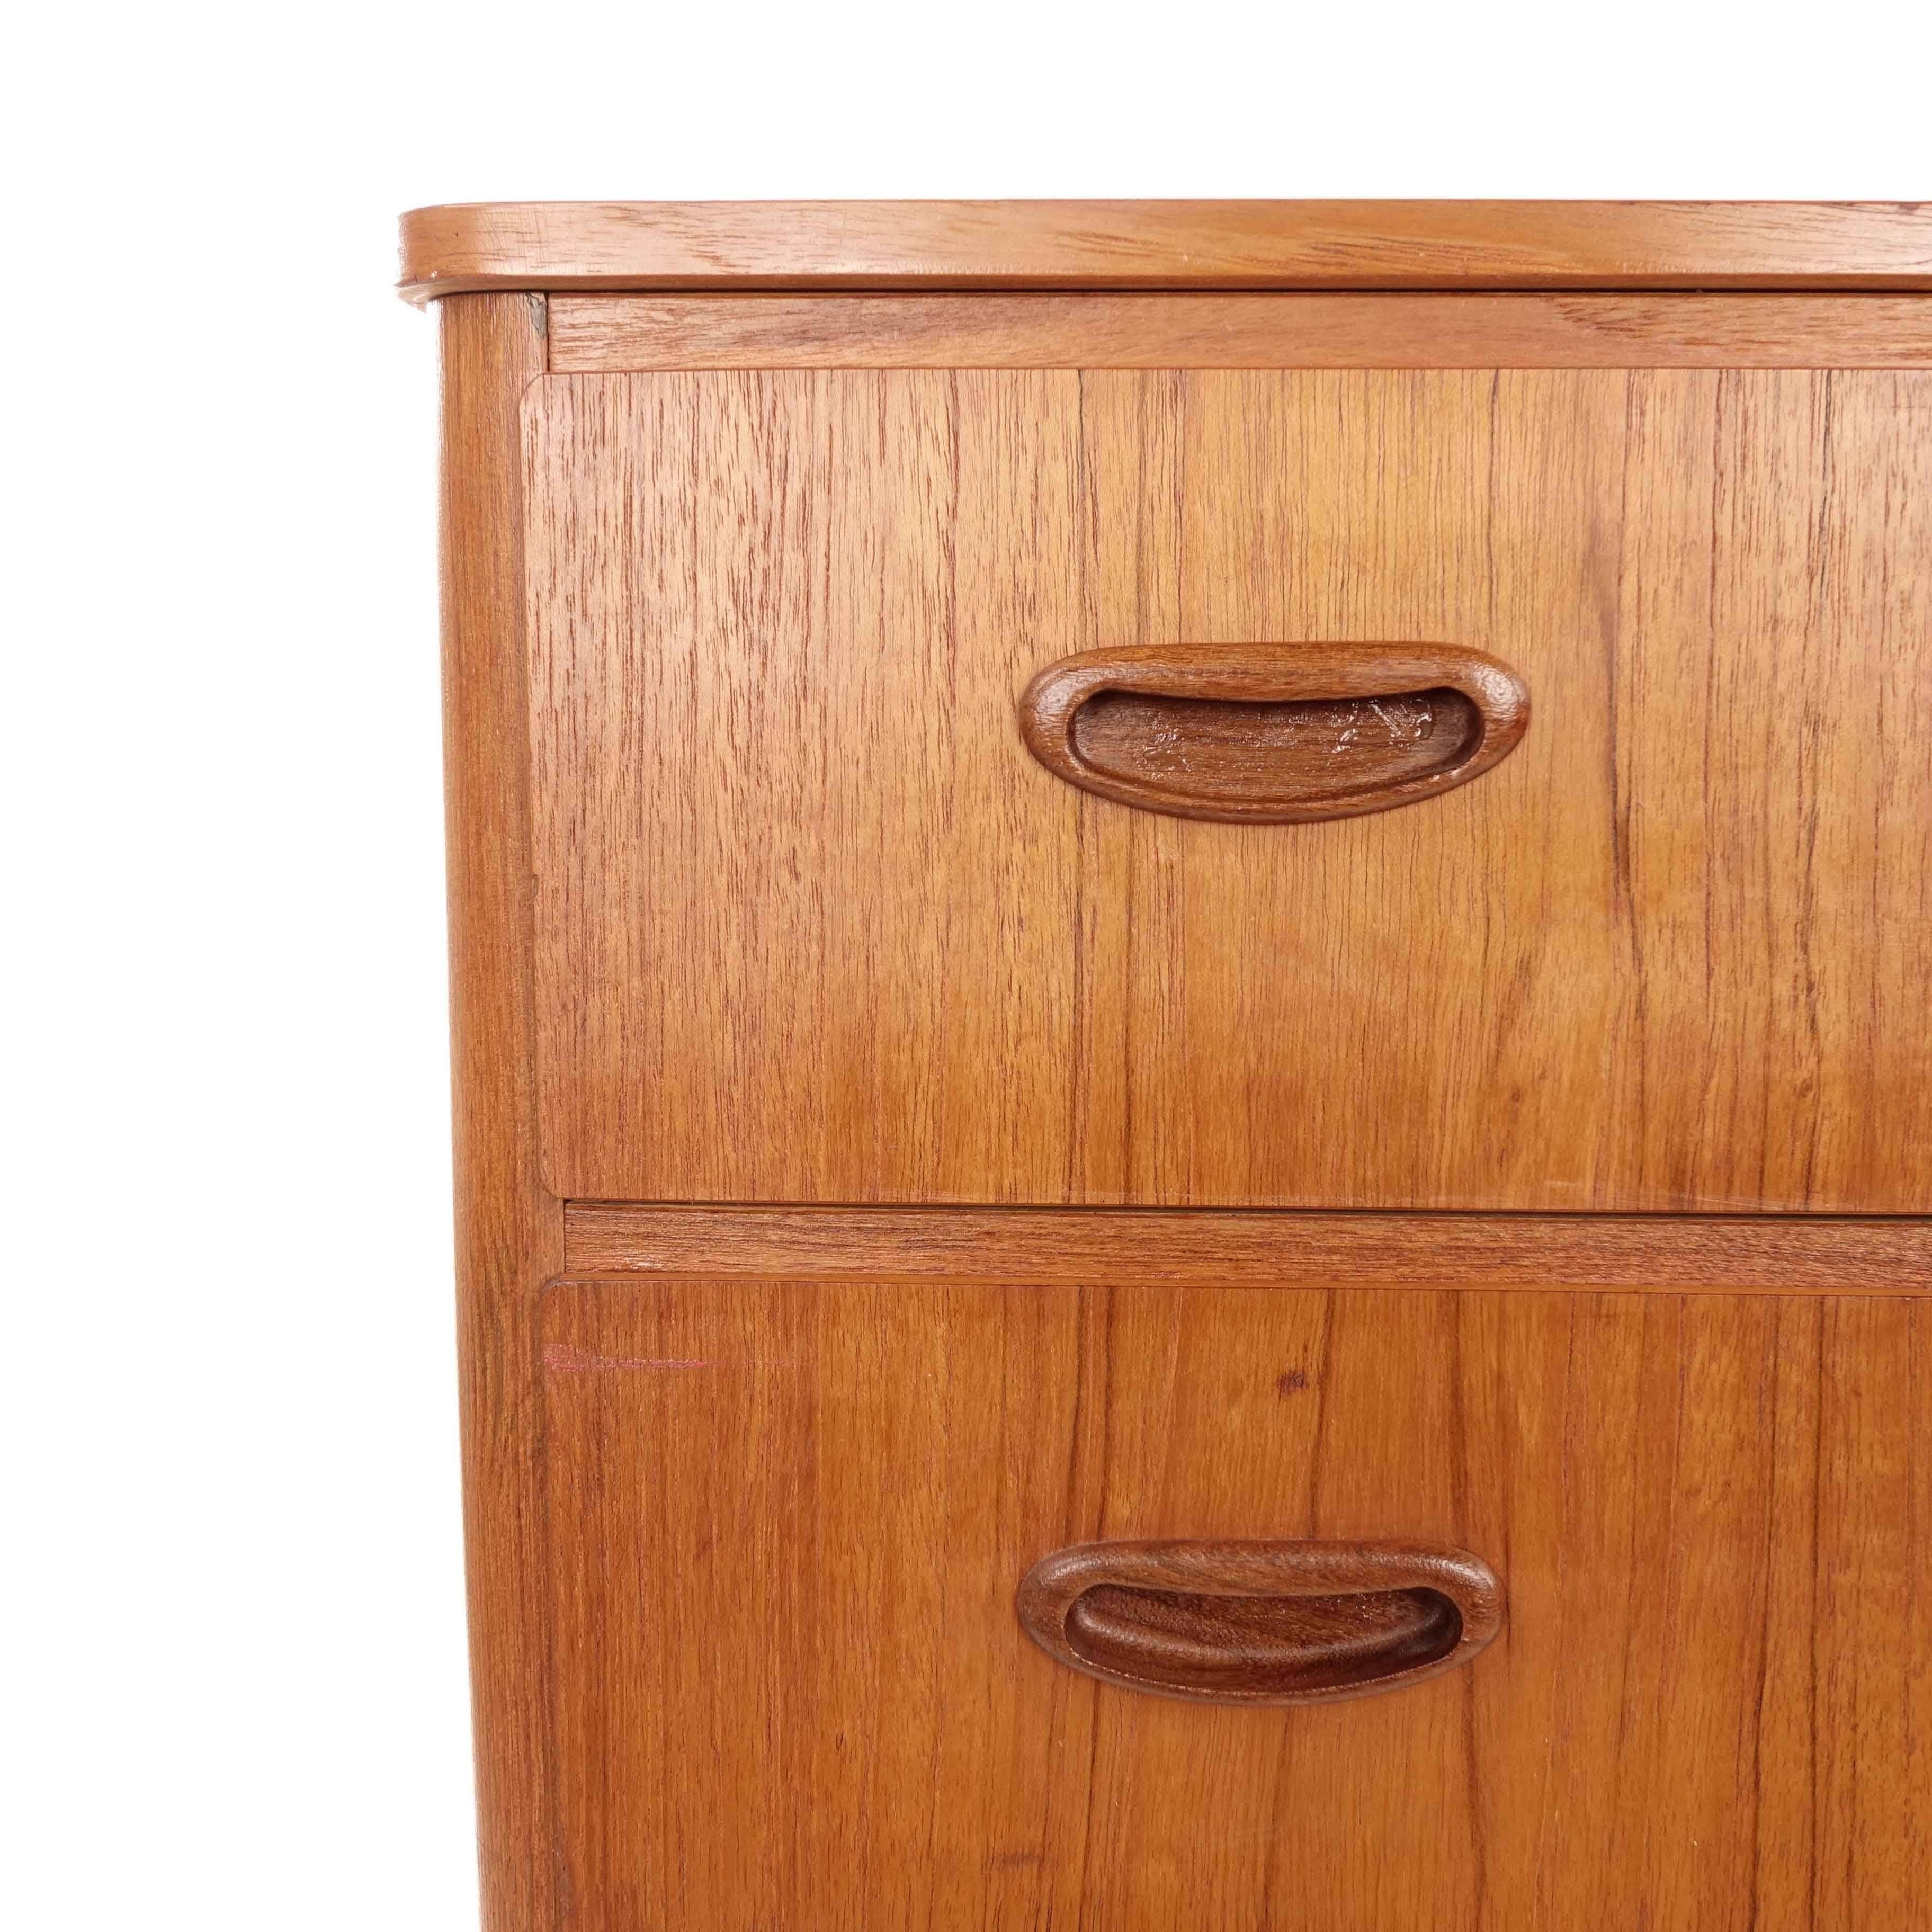 Beautiful chest in great condition with four drawers. Perfect to add character to any room.